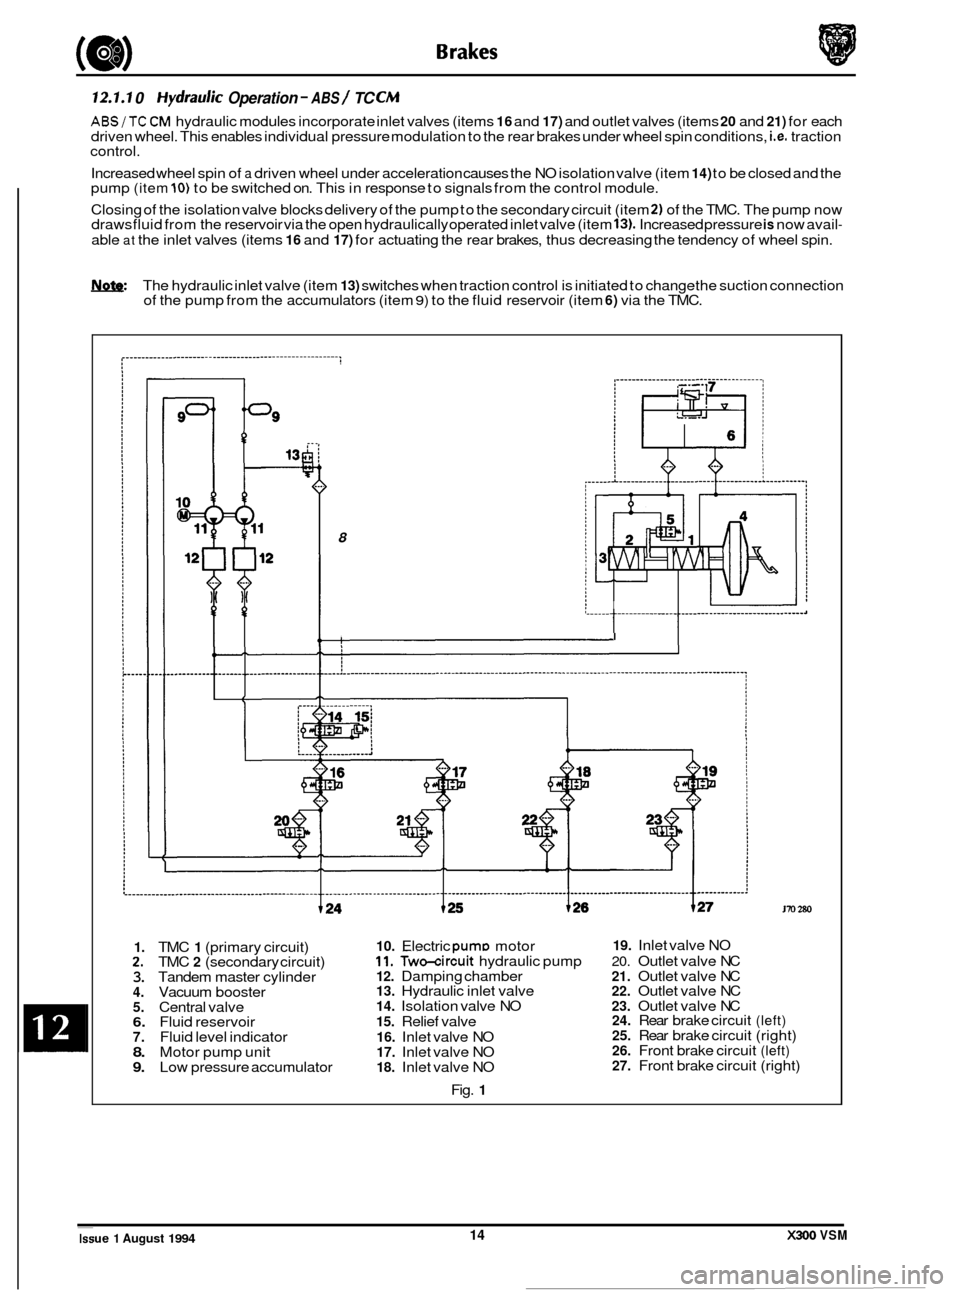 JAGUAR XJ6 1994 2.G User Guide 12.1.1 0 Hydrauric Operation - ABS 1 TC CM 
ABS/TC CM hydraulic modules incorporate inlet  valves (items 16 and 17) and outlet  valves  (items 20 and 21) for each 
driven  wheel. This  enables individ